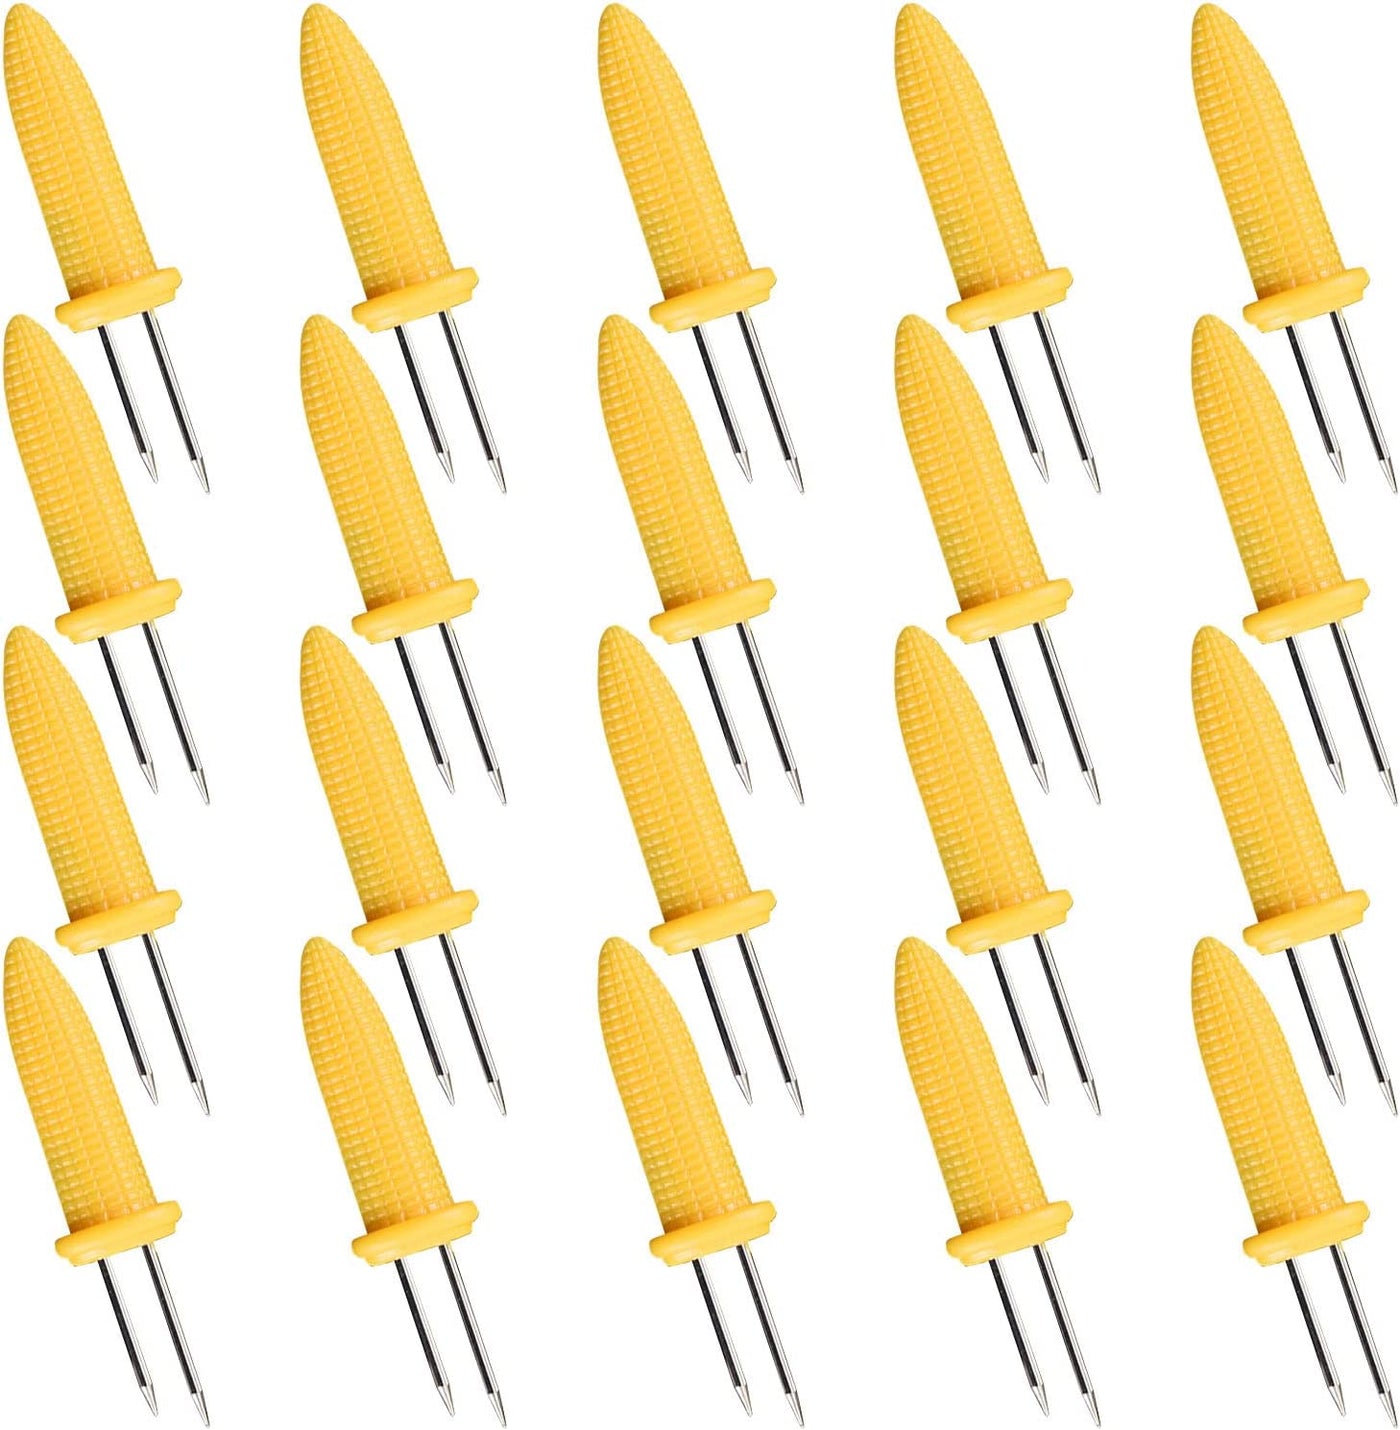 20 Corn Holders for Eating Stainless Steel Corn Cob Holder Impale The Pins On The Holder to Each Side of Corn Cob's Ears 